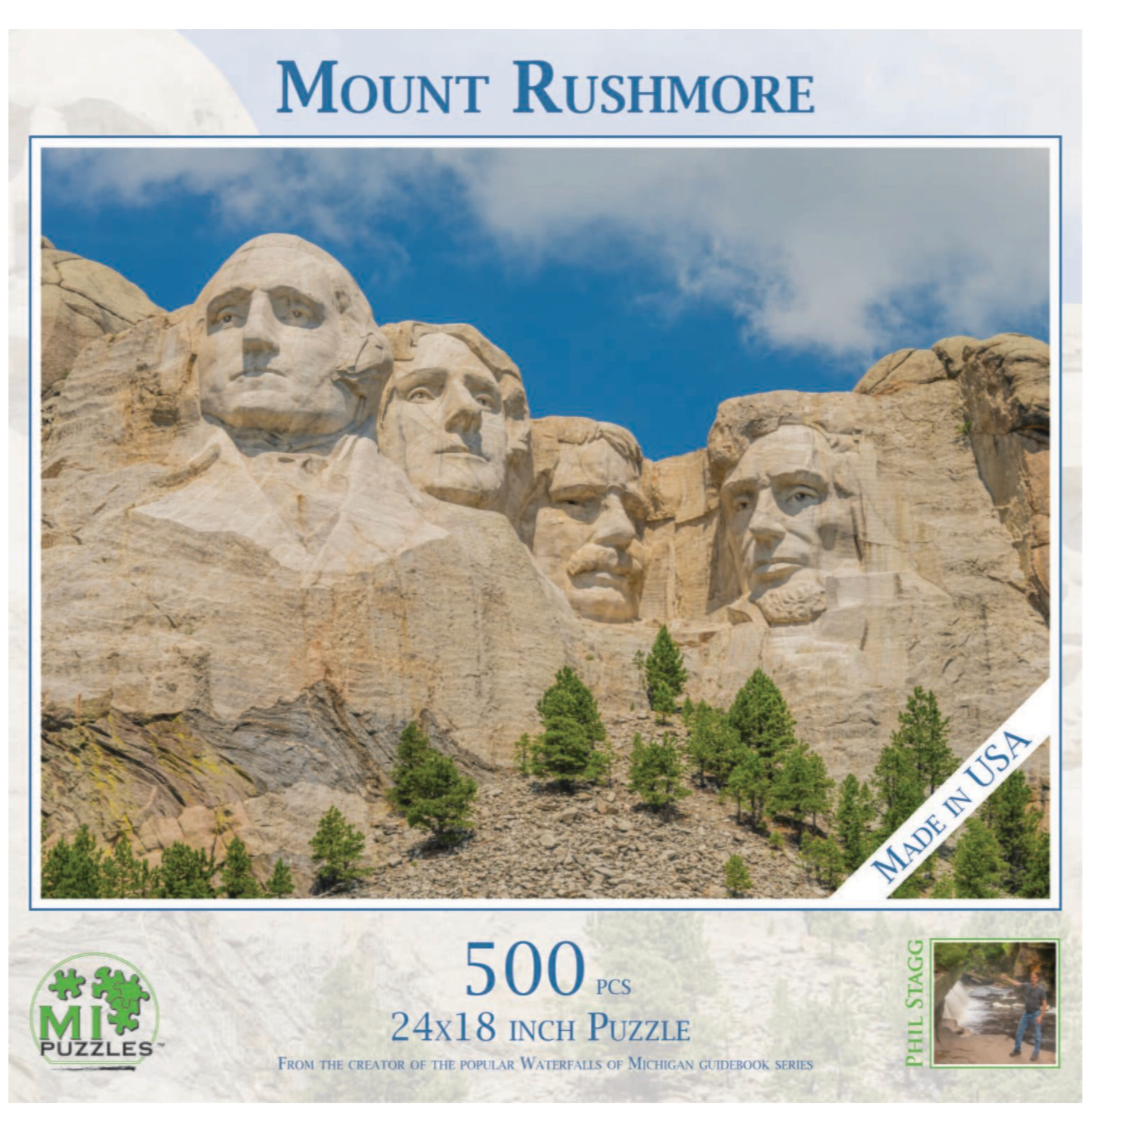 Mount Rushmore 500 pc Jigsaw Puzzle